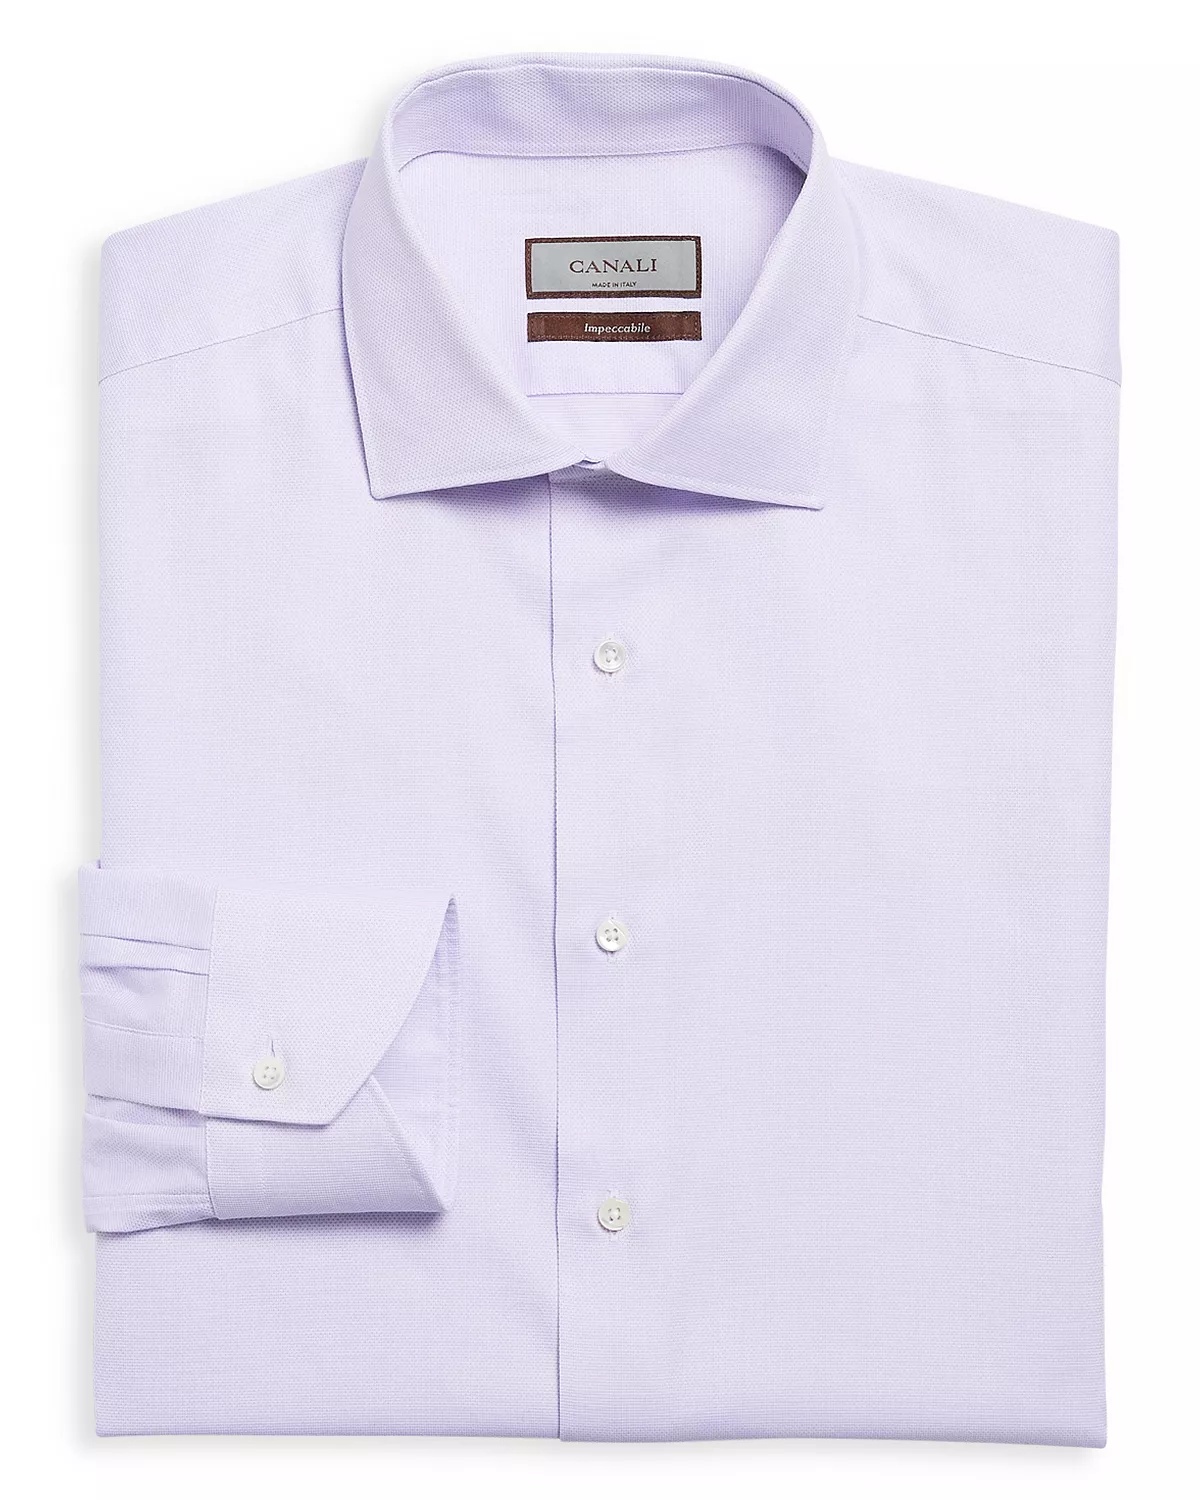 Impeccable Textured Solid Regular Fit Dress Shirt - 4